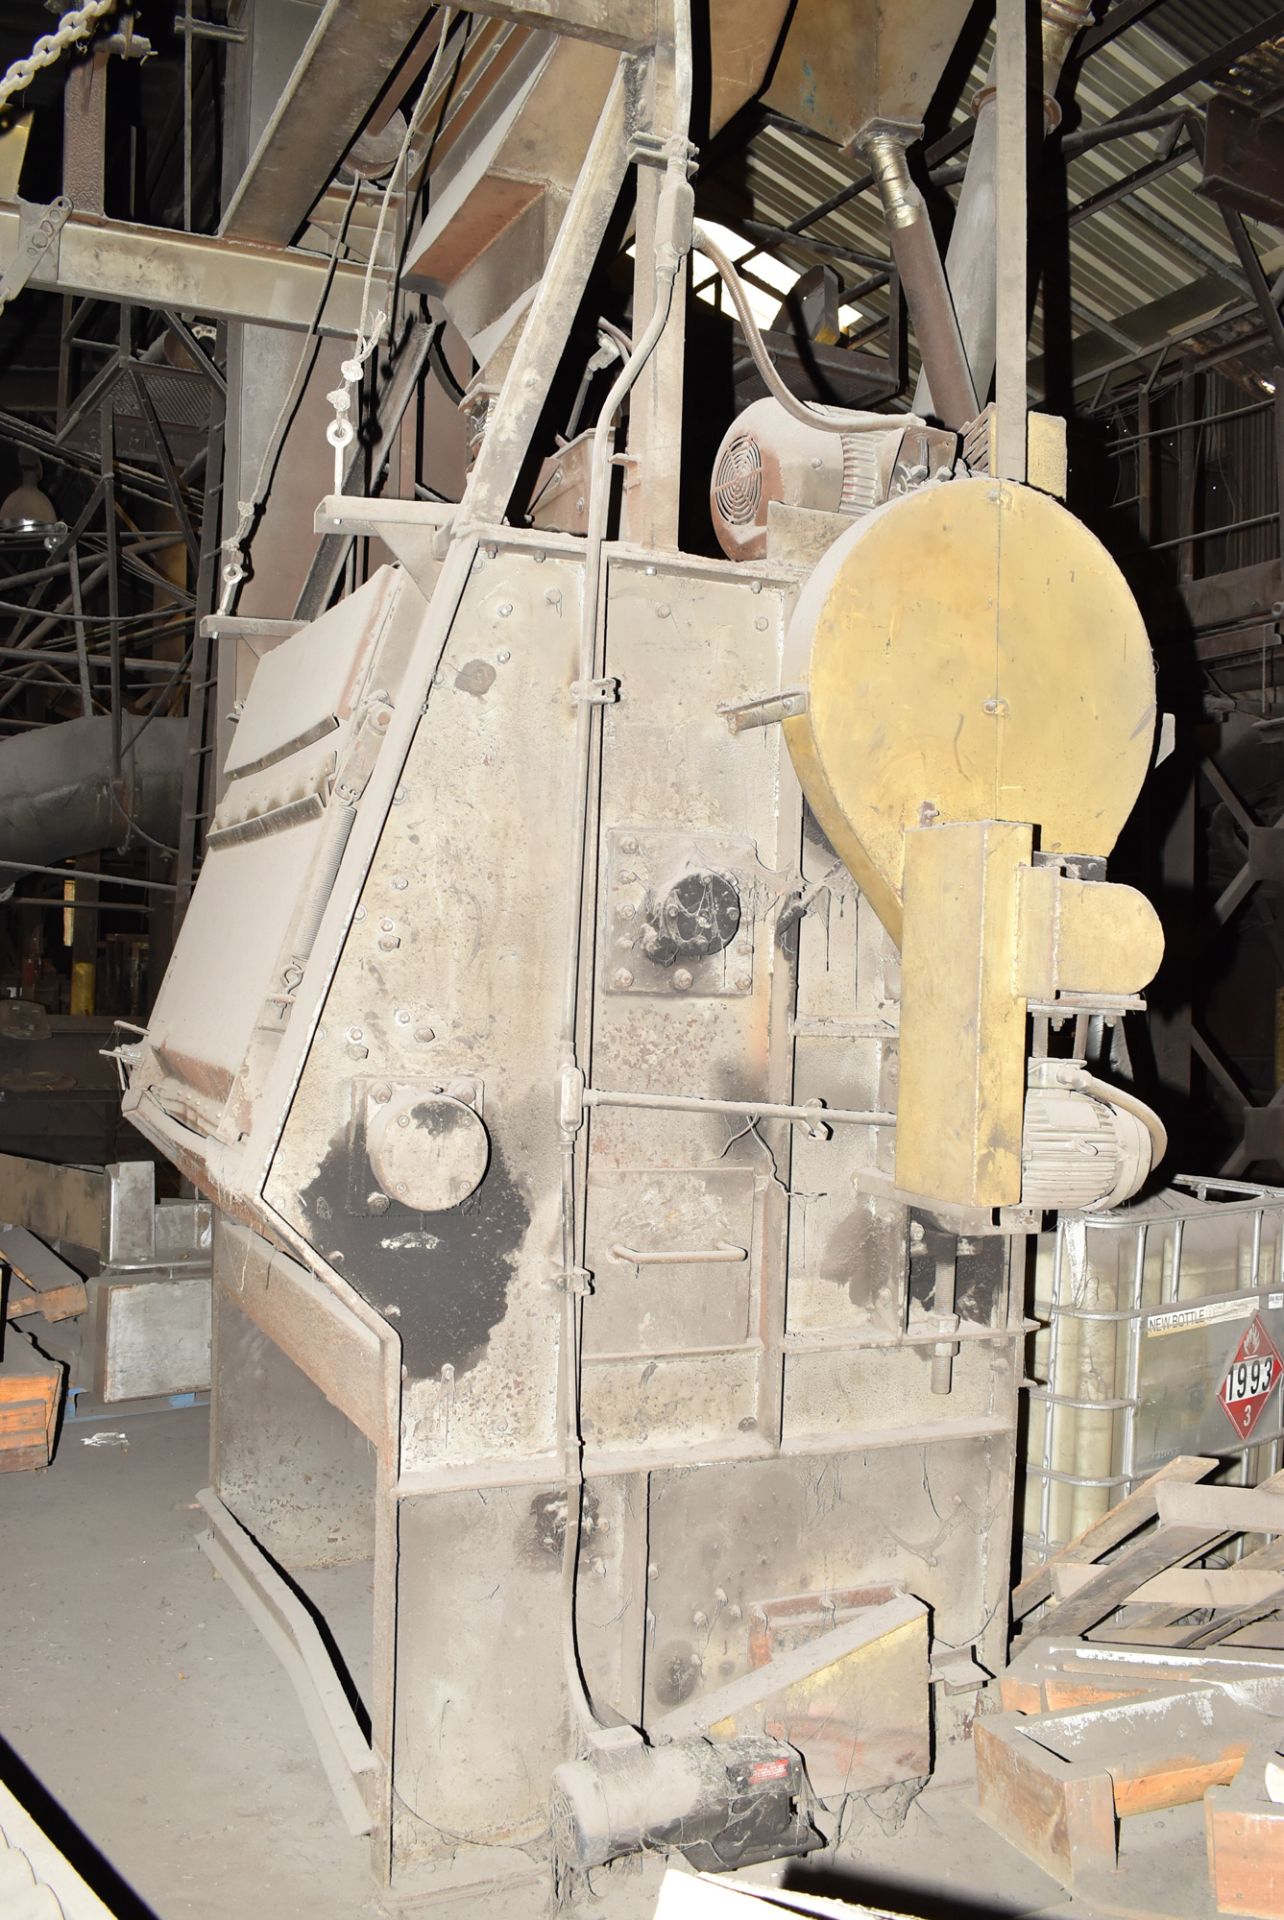 WHEELABRATOR 36" x 42" ROTARY TUMBLAST CLEANING MACHINE WITH LOADER, S/N N/A (CI) - Image 3 of 4